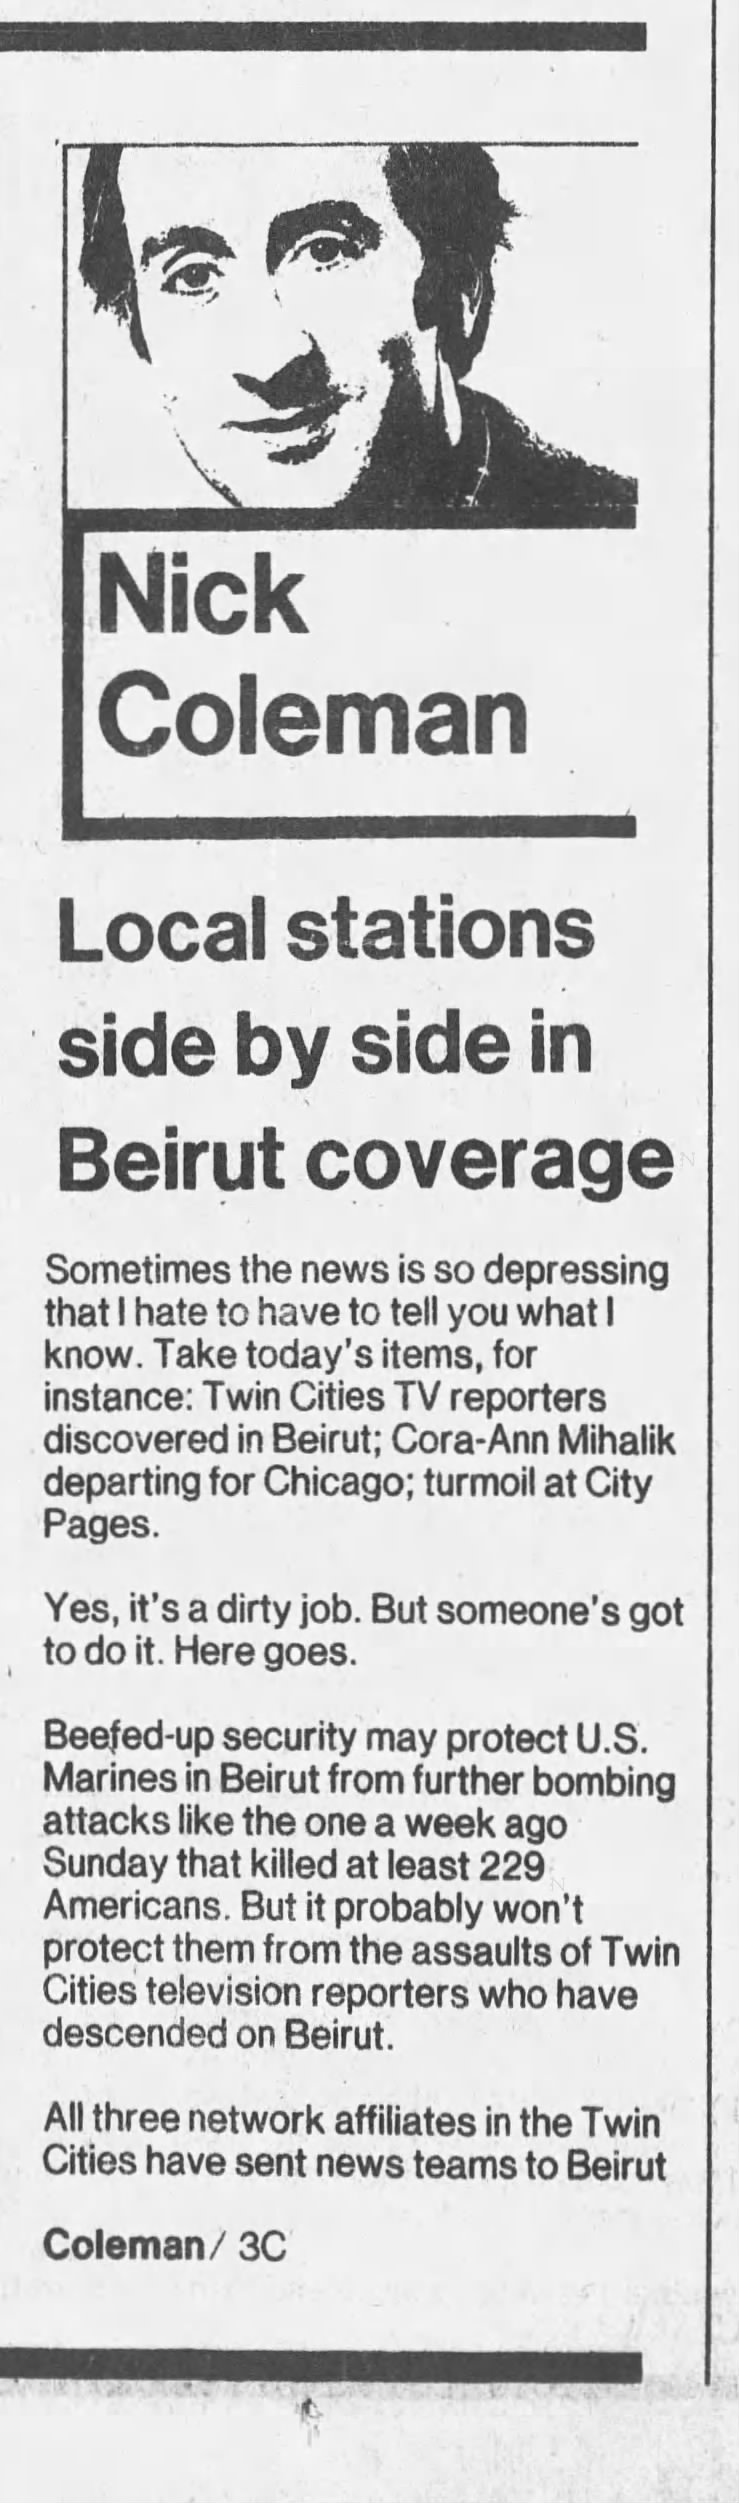 Local stations side by side in Beirut coverage